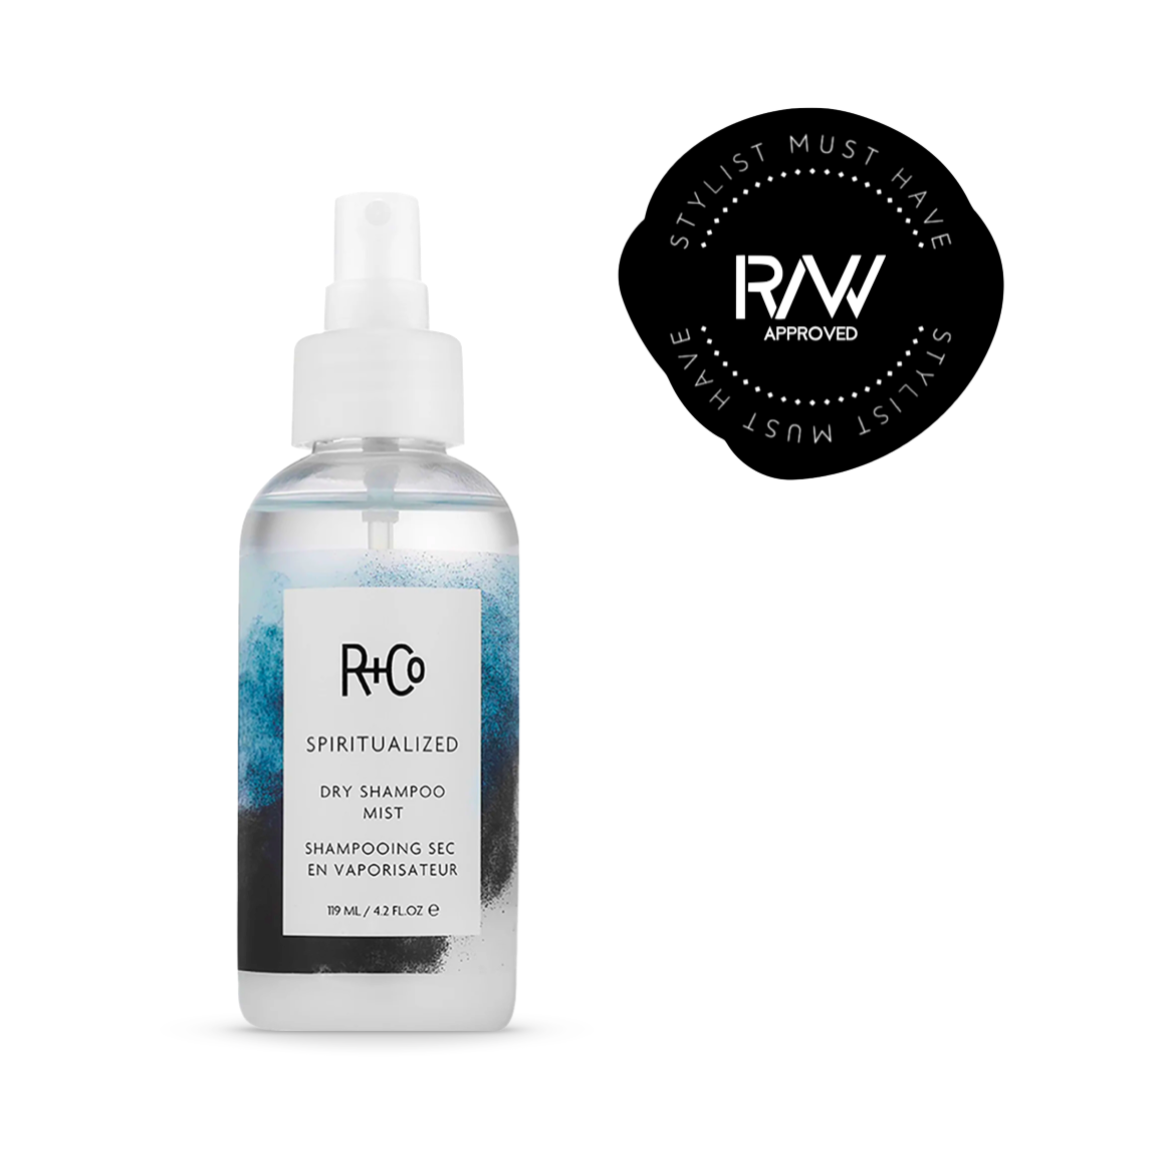 Clear bottle with a white spray nozzle of R+Co Spiritualized Dry Shampoo Mist, 4.2oz. The label features the distinctive R+Co logo with a smoky blue watercolor design, emphasizing its micellar formula that refreshes hair without powdery residue.